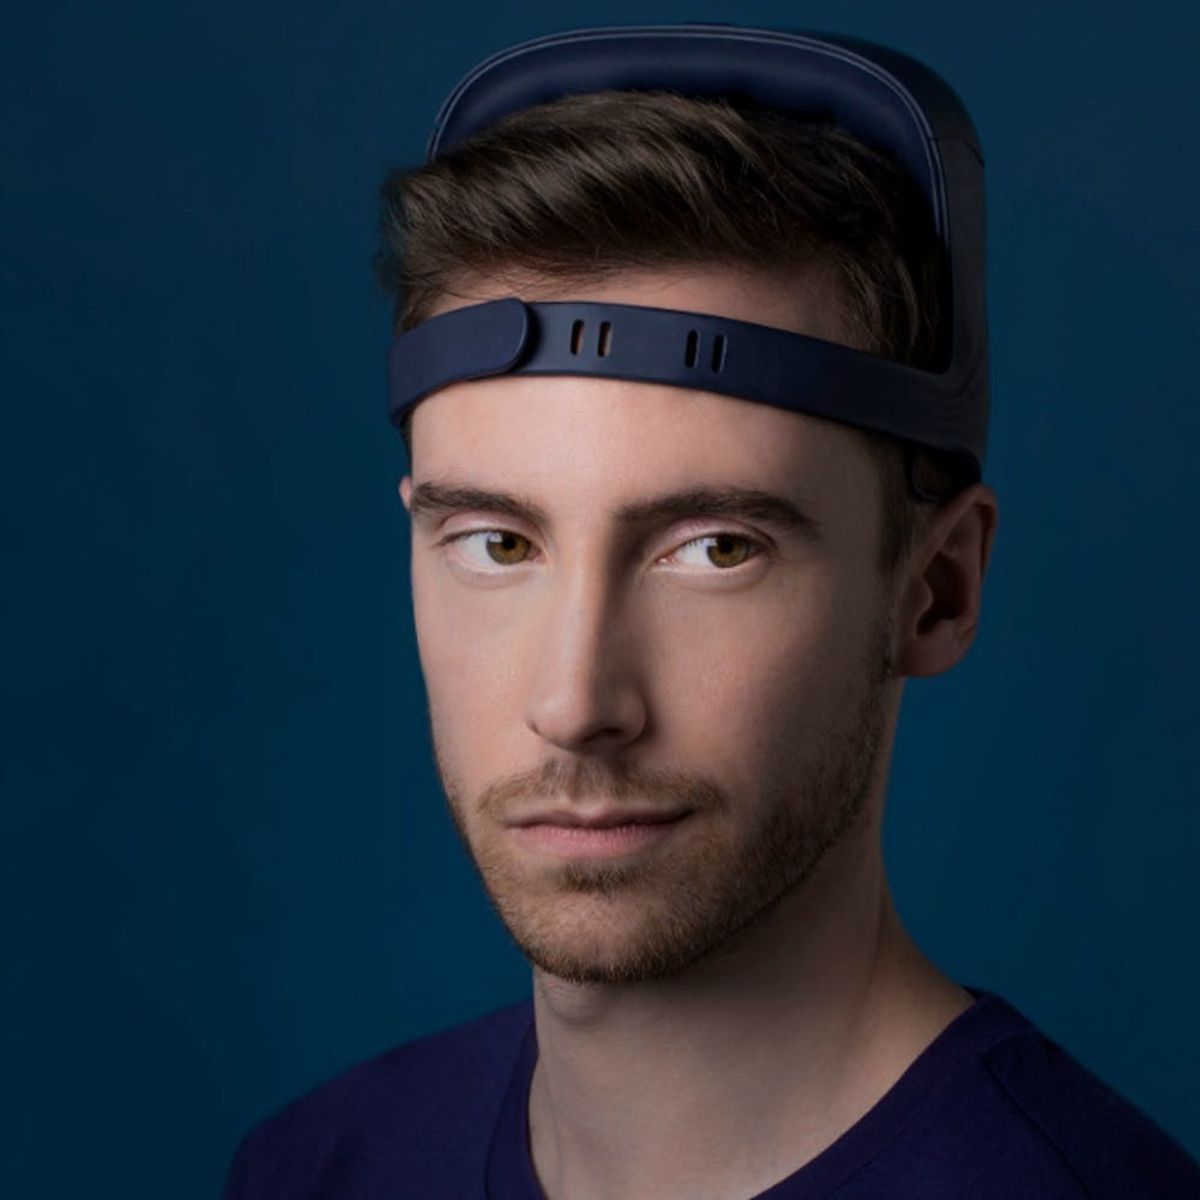 This Fancy Headband Could Help You Catch More ZZZs